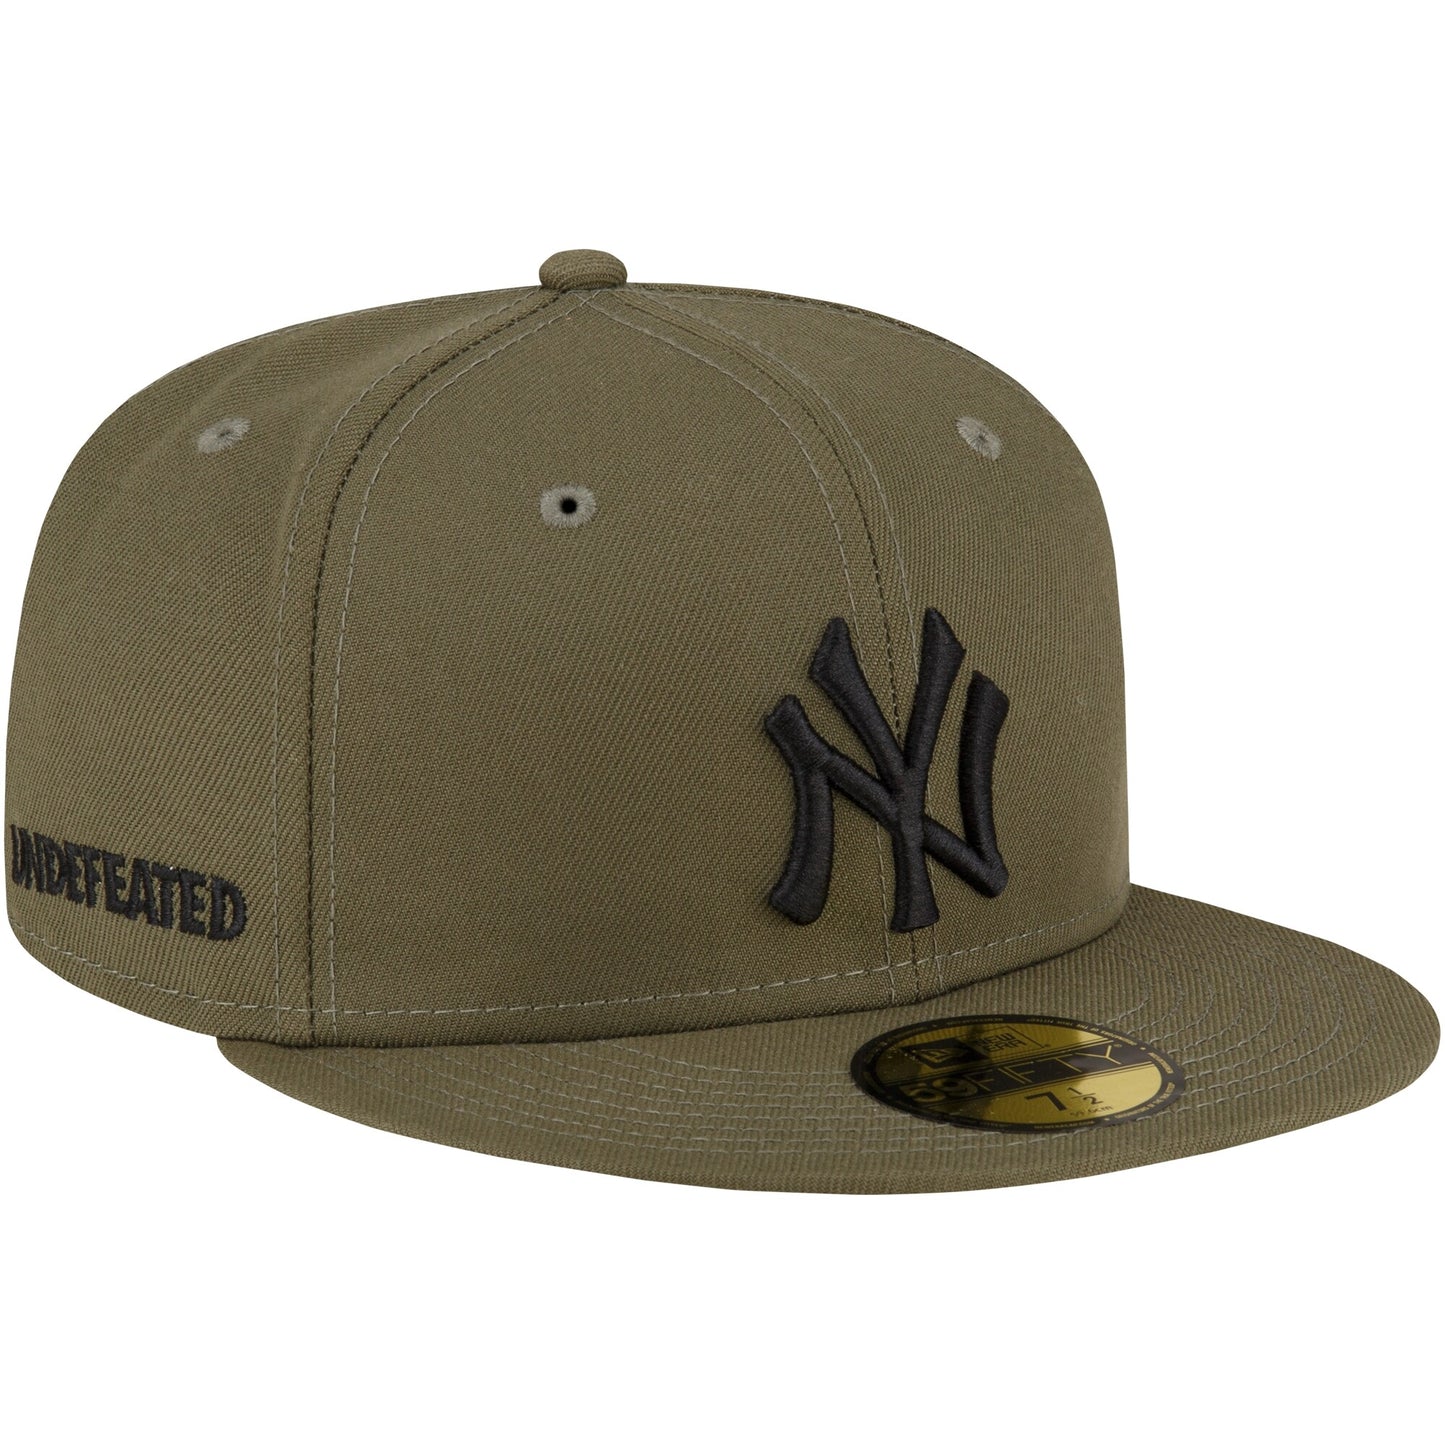 New York Yankees New Era x Undefeated 59FIFTY Fitted Hat - Green